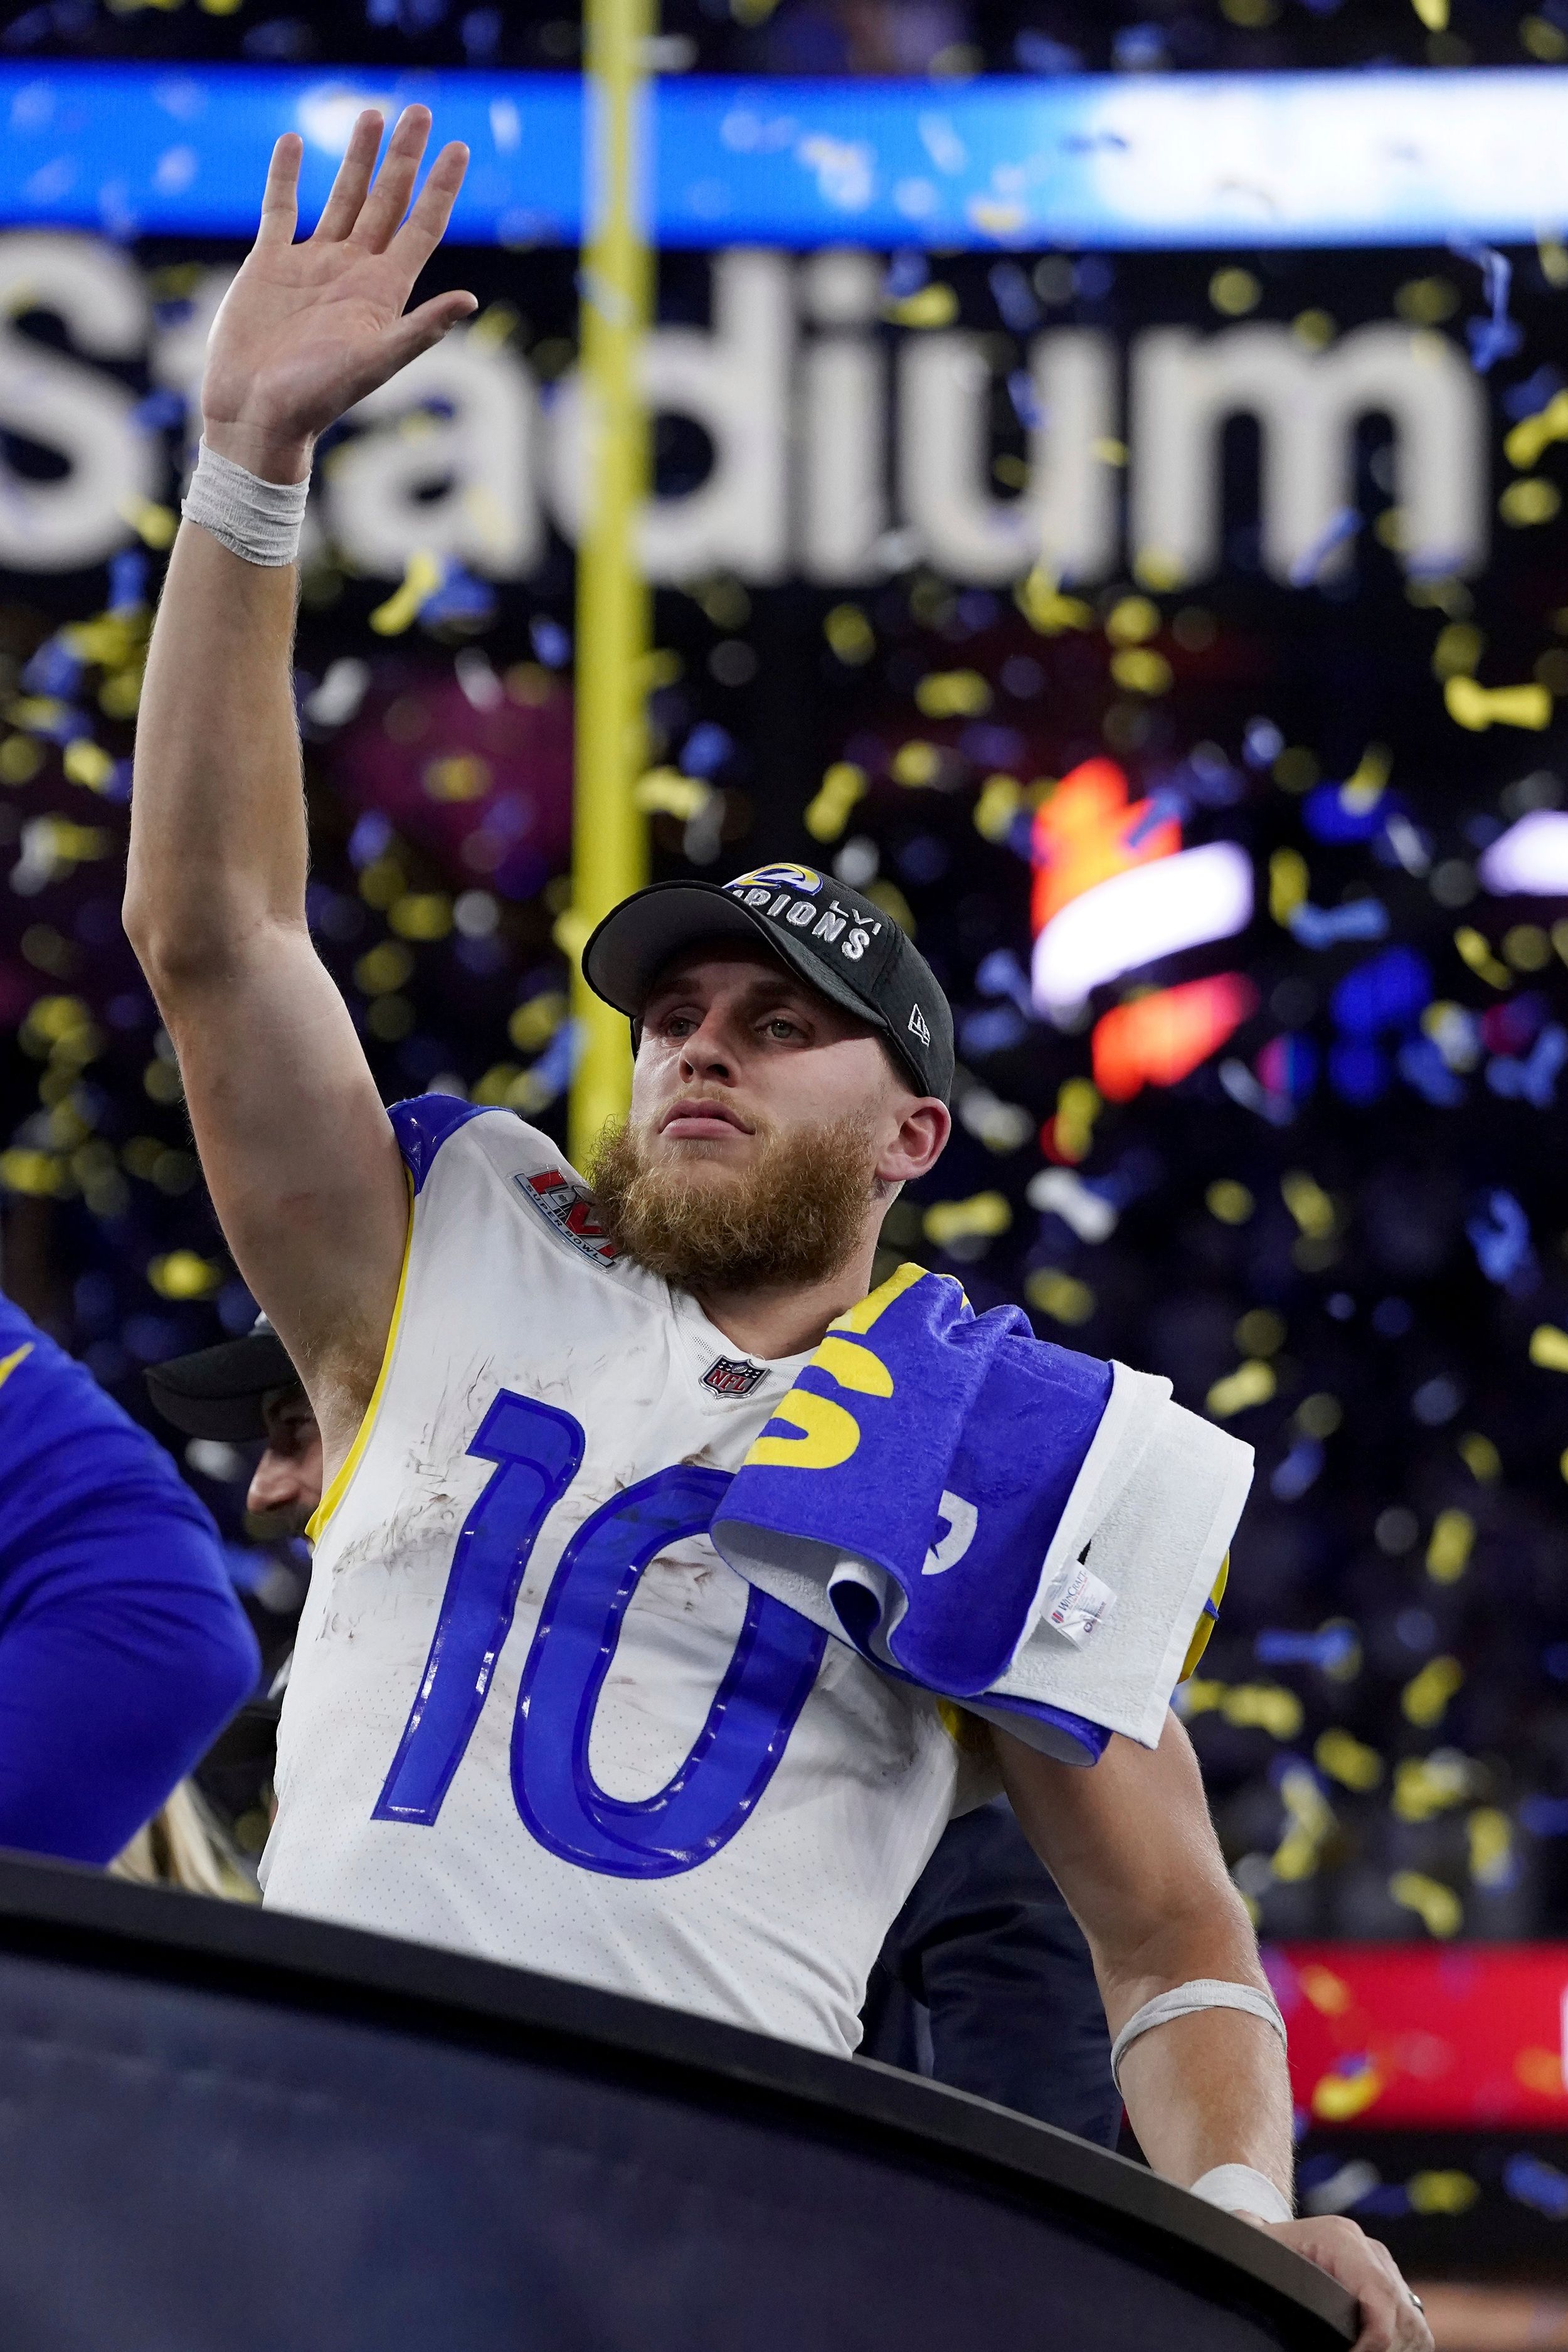 Commentary: Super Bowl MVP Cooper Kupp showed why he's No. 1, and